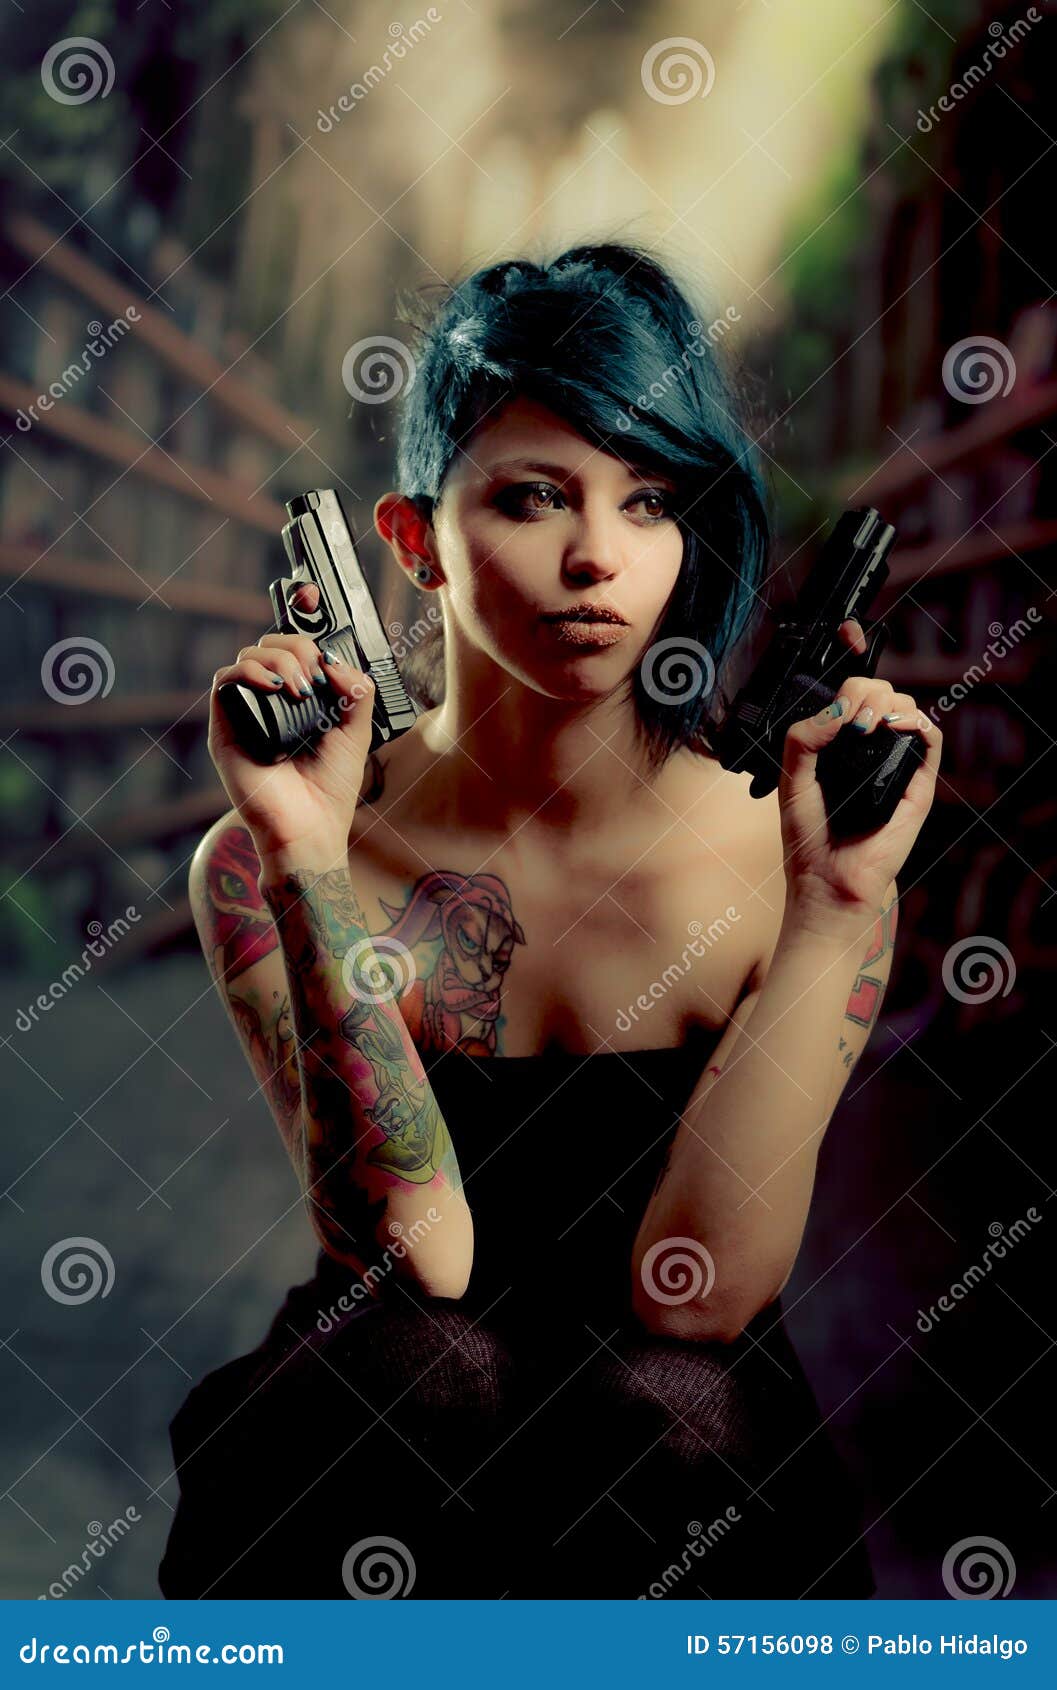 Amazing Gangster Girl Tattoo On Right Forearm